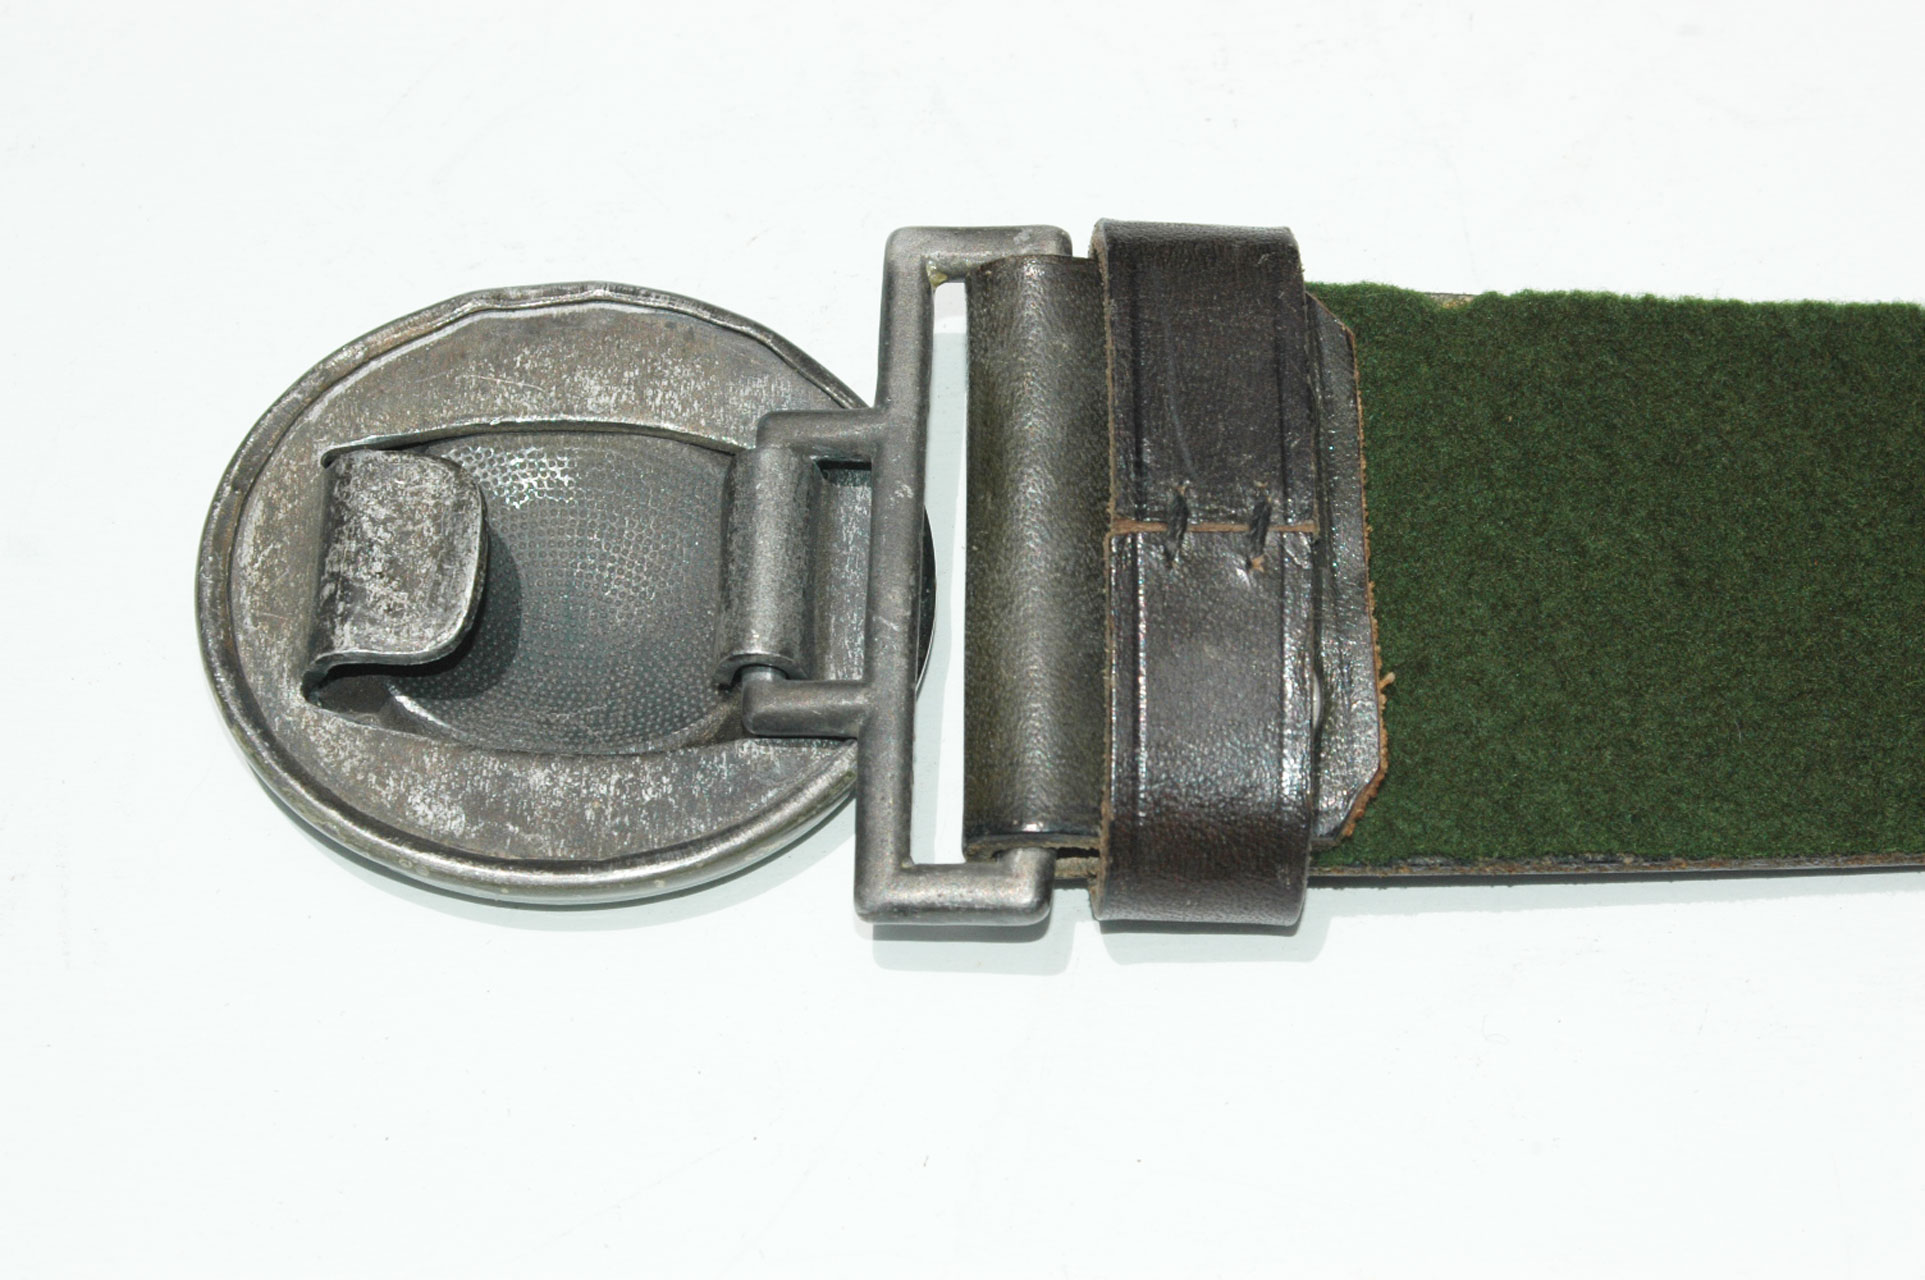 TAIGA Forestry Leather BELT with forged Buckle, brown belts